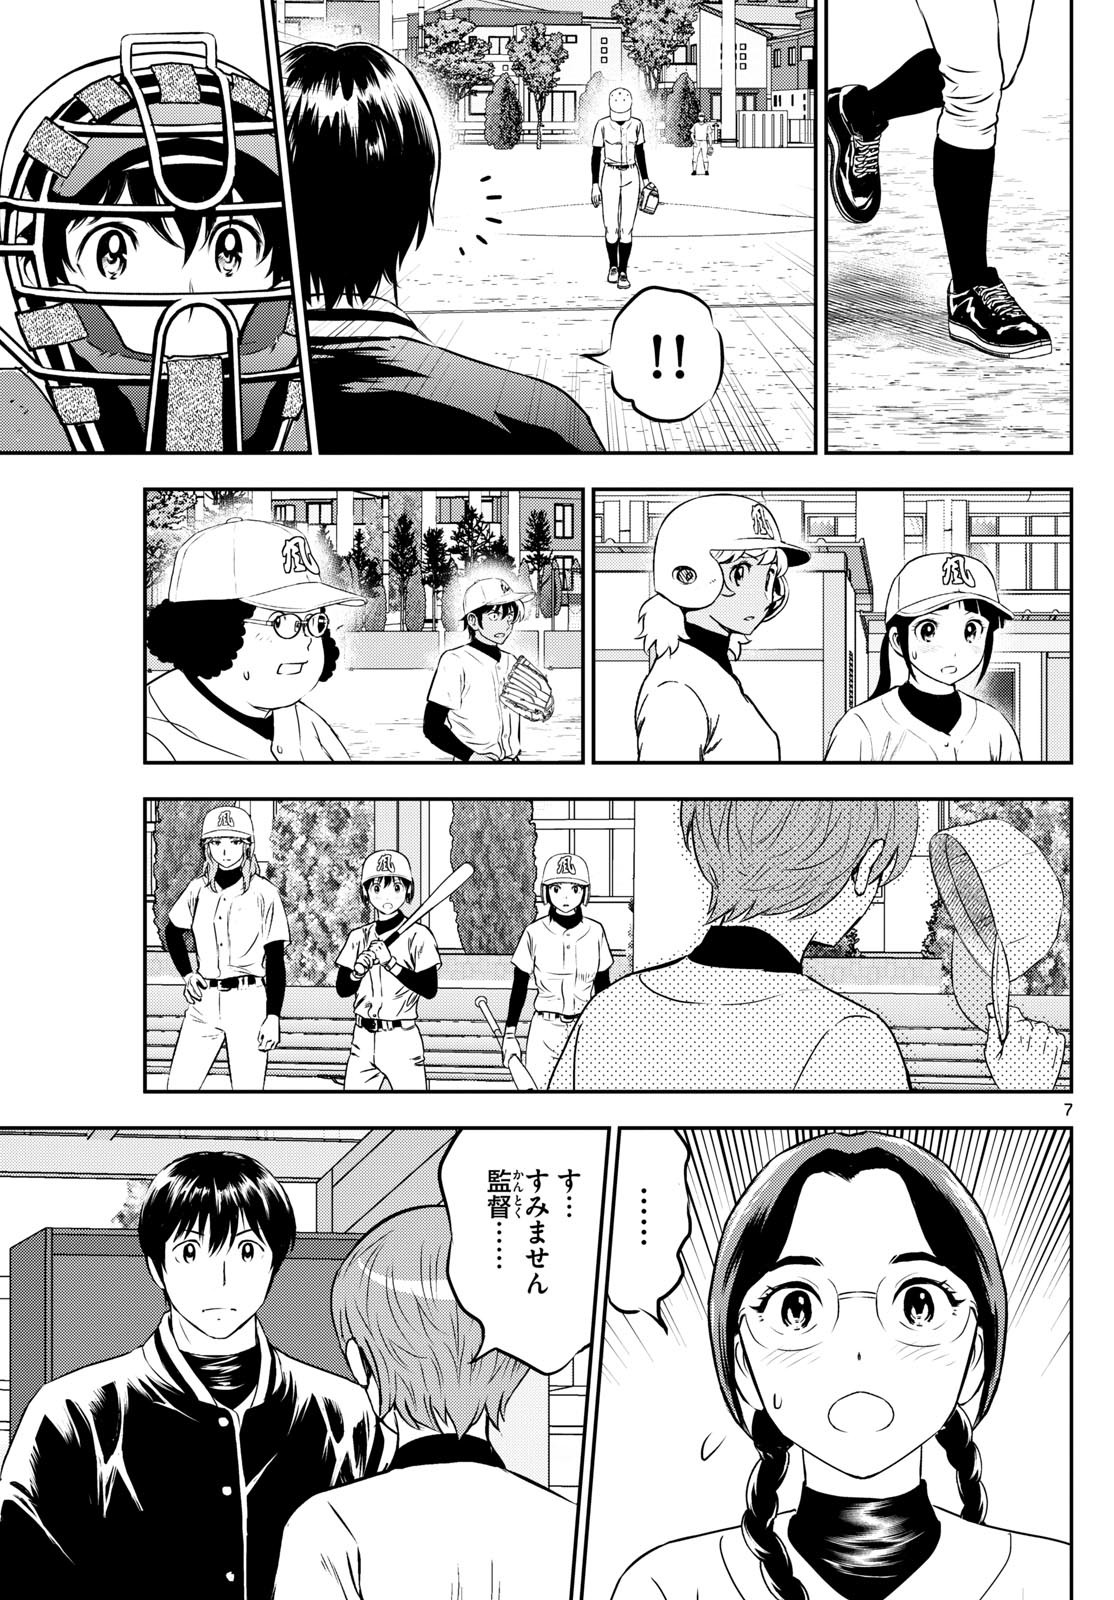 Major 2nd - メジャーセカンド - Chapter 281 - Page 7